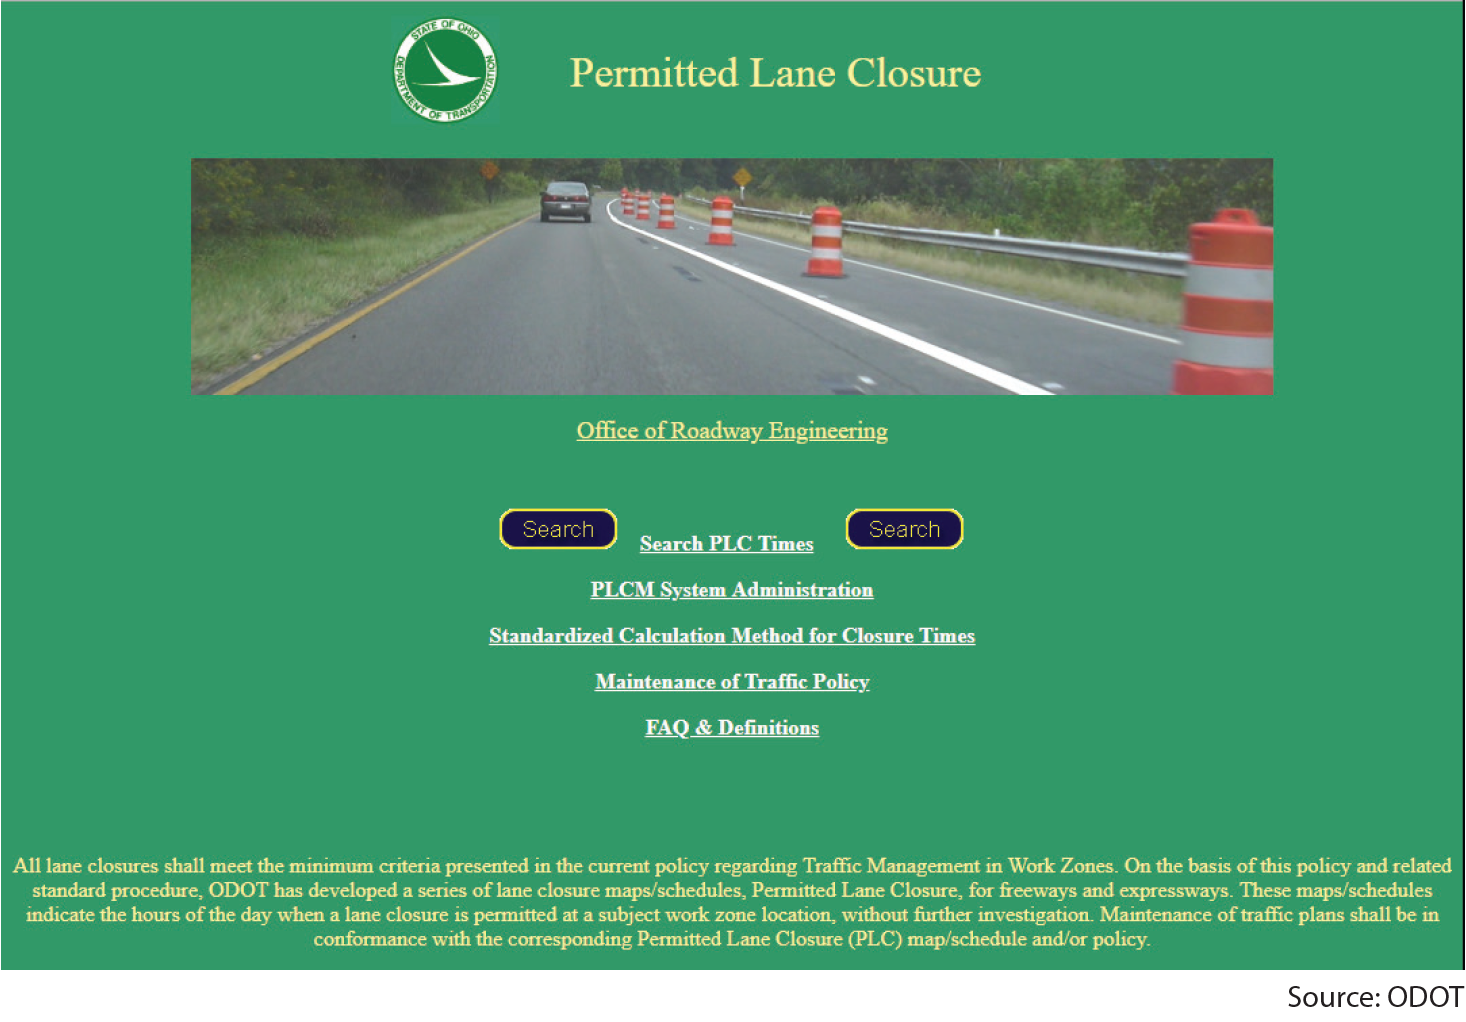 Image of the Ohio DOT Permitted Lane Closure web page.